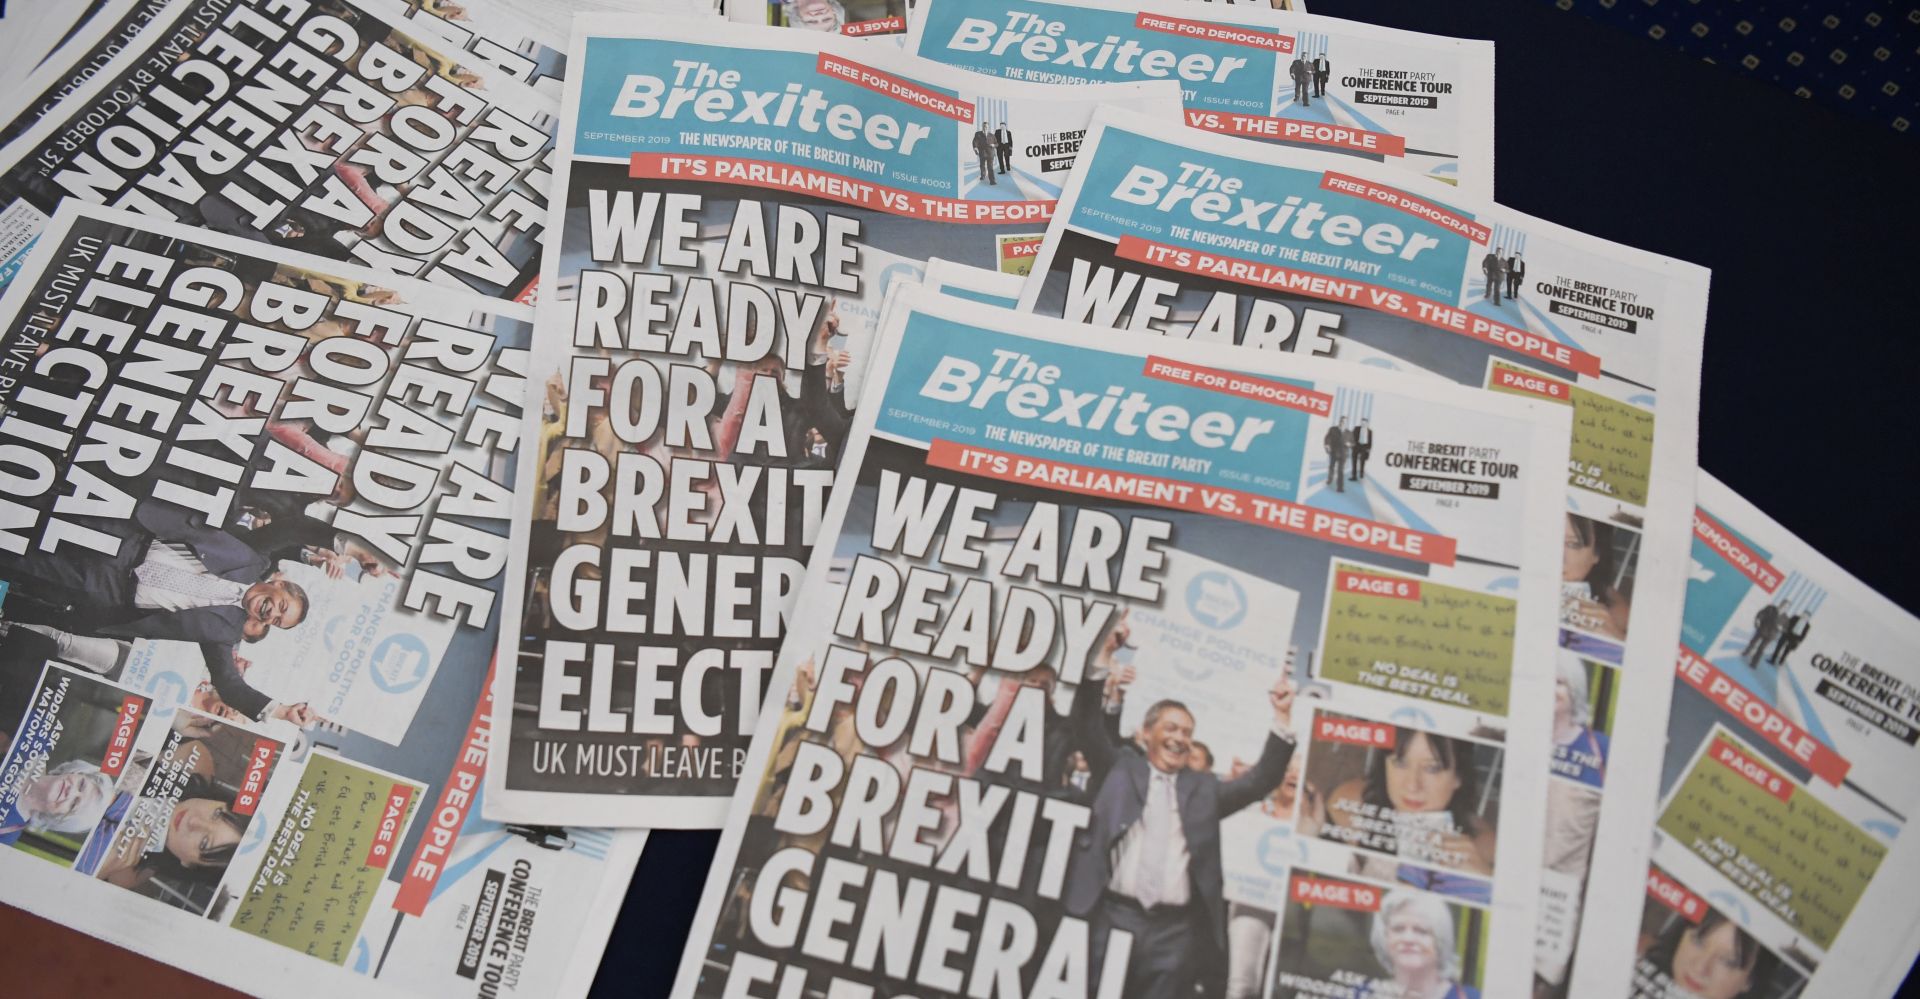 epa07797132 Copies of the Brexiteer newspaper ahead of the Brexit Party leader Nigel Farage's speech in Westminster, London, Britain, 27 August 2019. Nigel Farage was speaking to party members and delegates during the party's presentation of prospective parliamentary candidates.  EPA/FACUNDO ARRIZABALAGA .